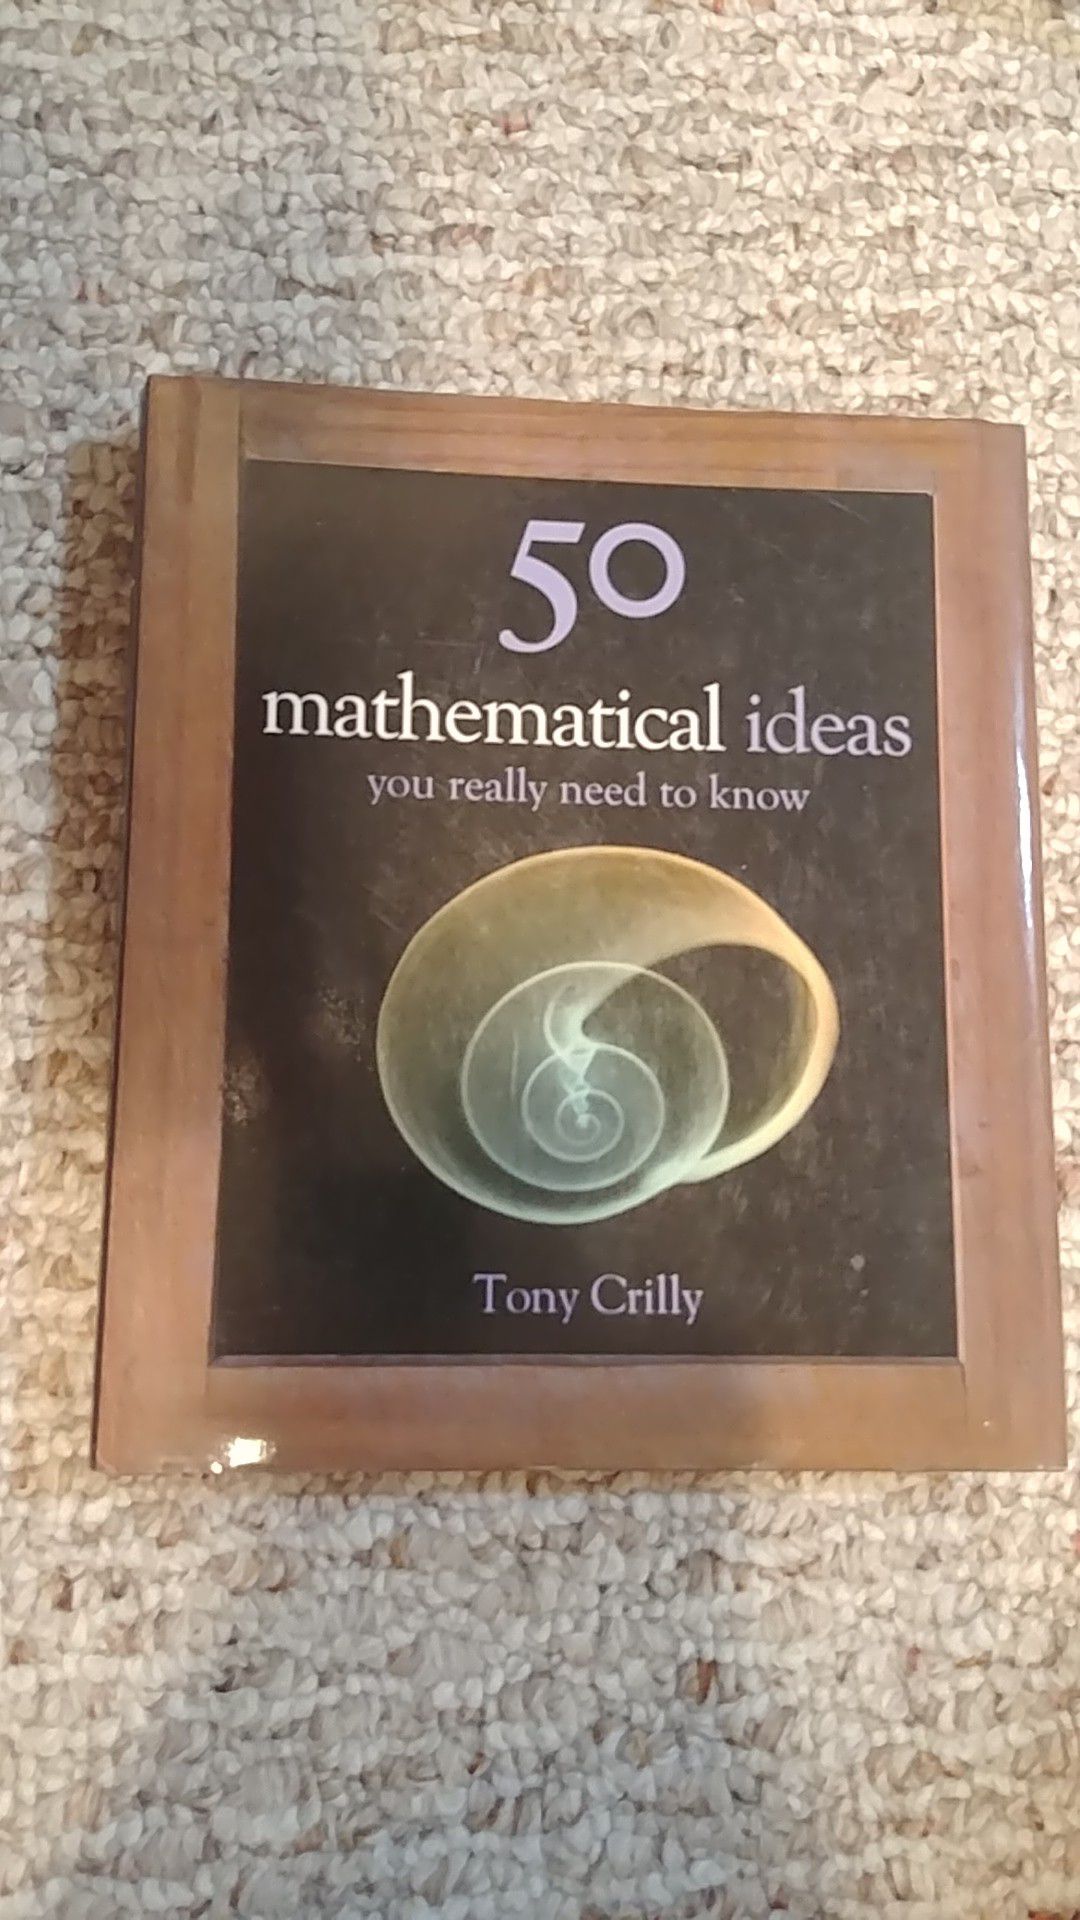 50 Mathematical Ideas You Really Need To Know by Tony Crilly